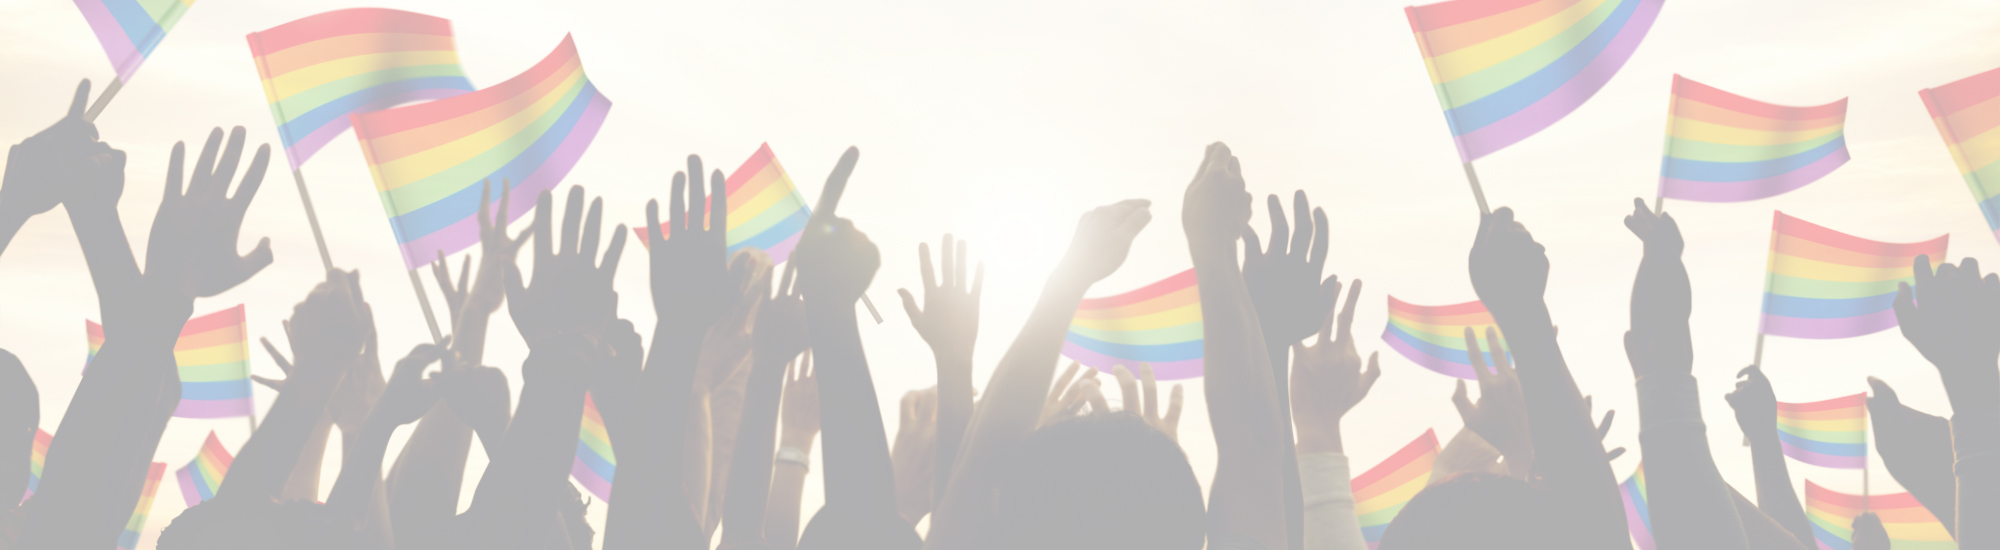 Essex Pride image of waving hands and pride flags